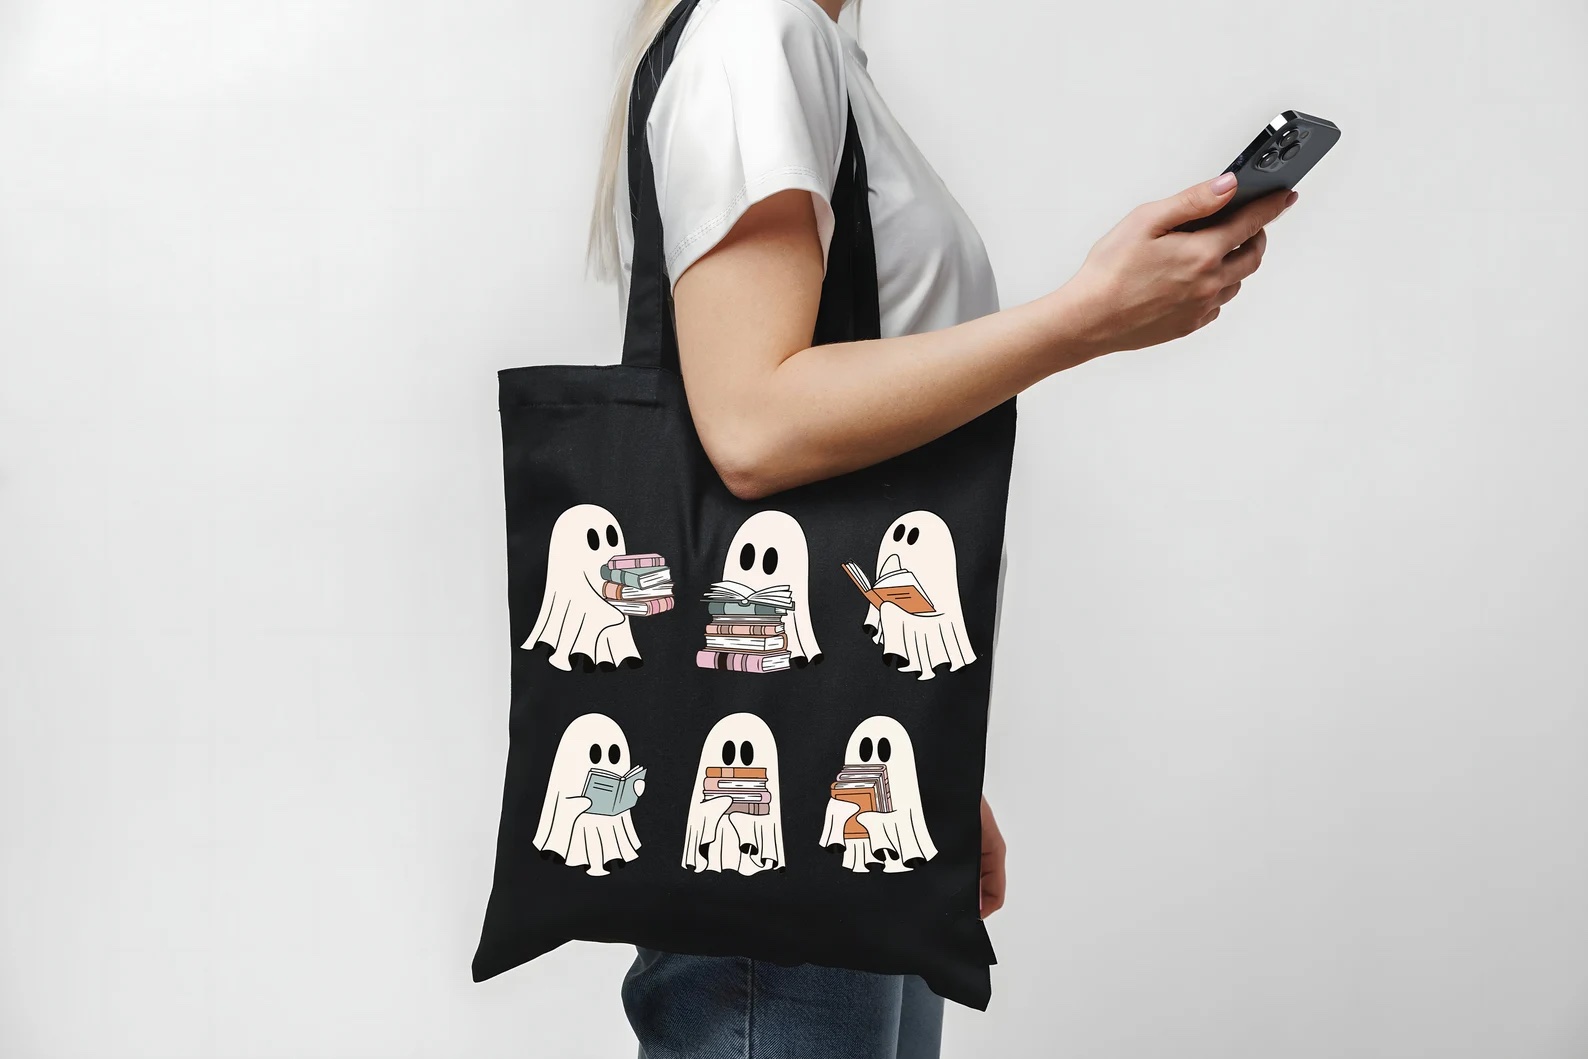 a photo of a white woman with a navy tote bag on her shoulder. The tote bag features six ghosts in various poses reading and carrying books.